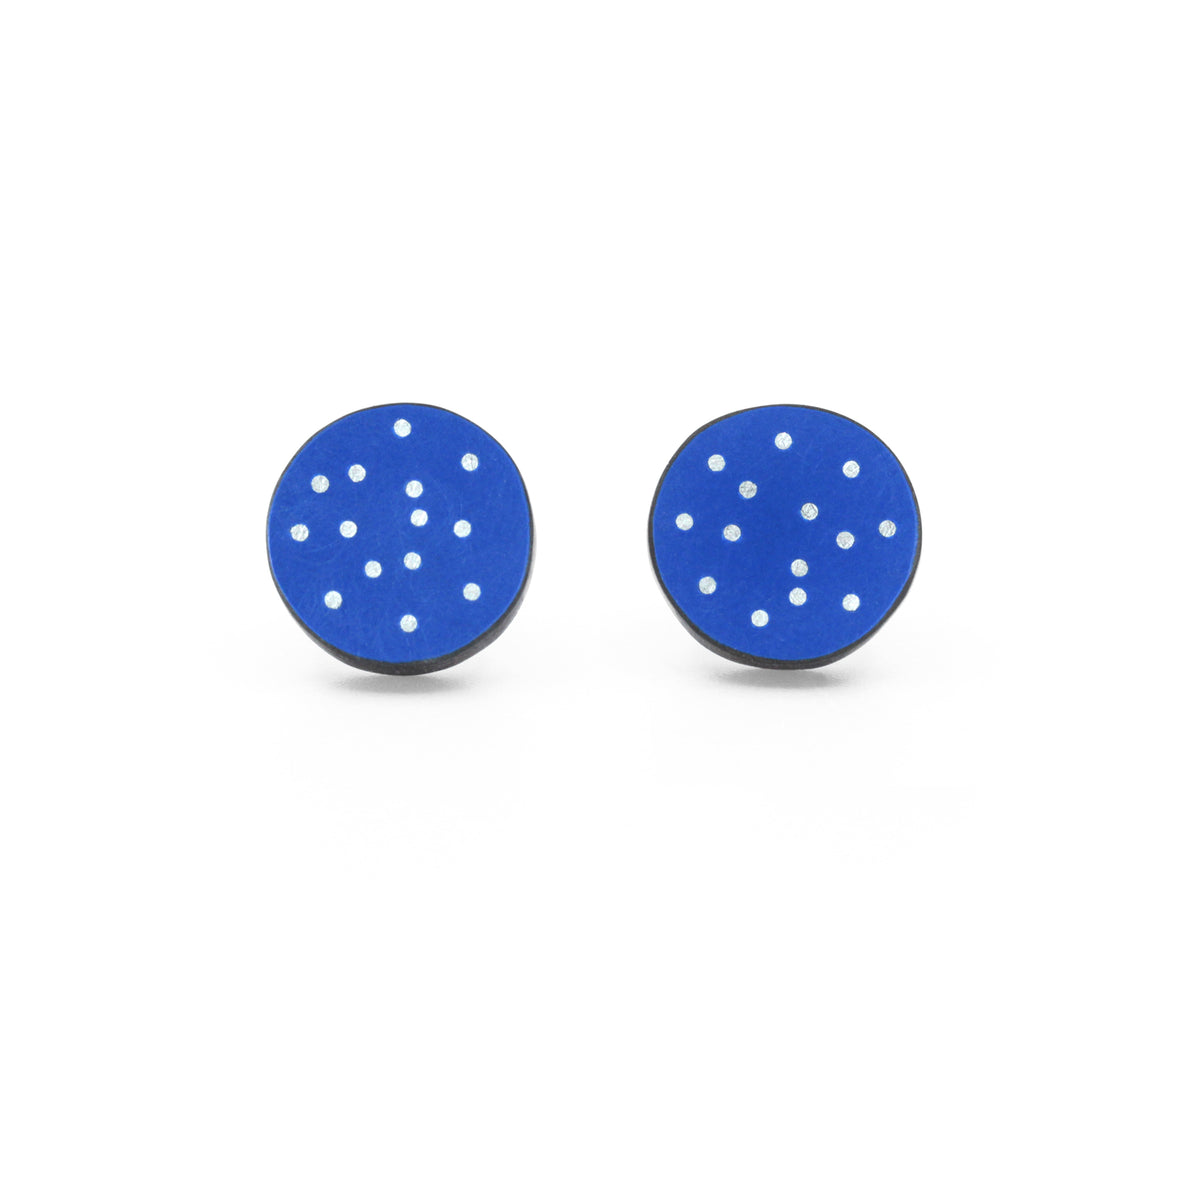 Small inlaid silver dot earrings